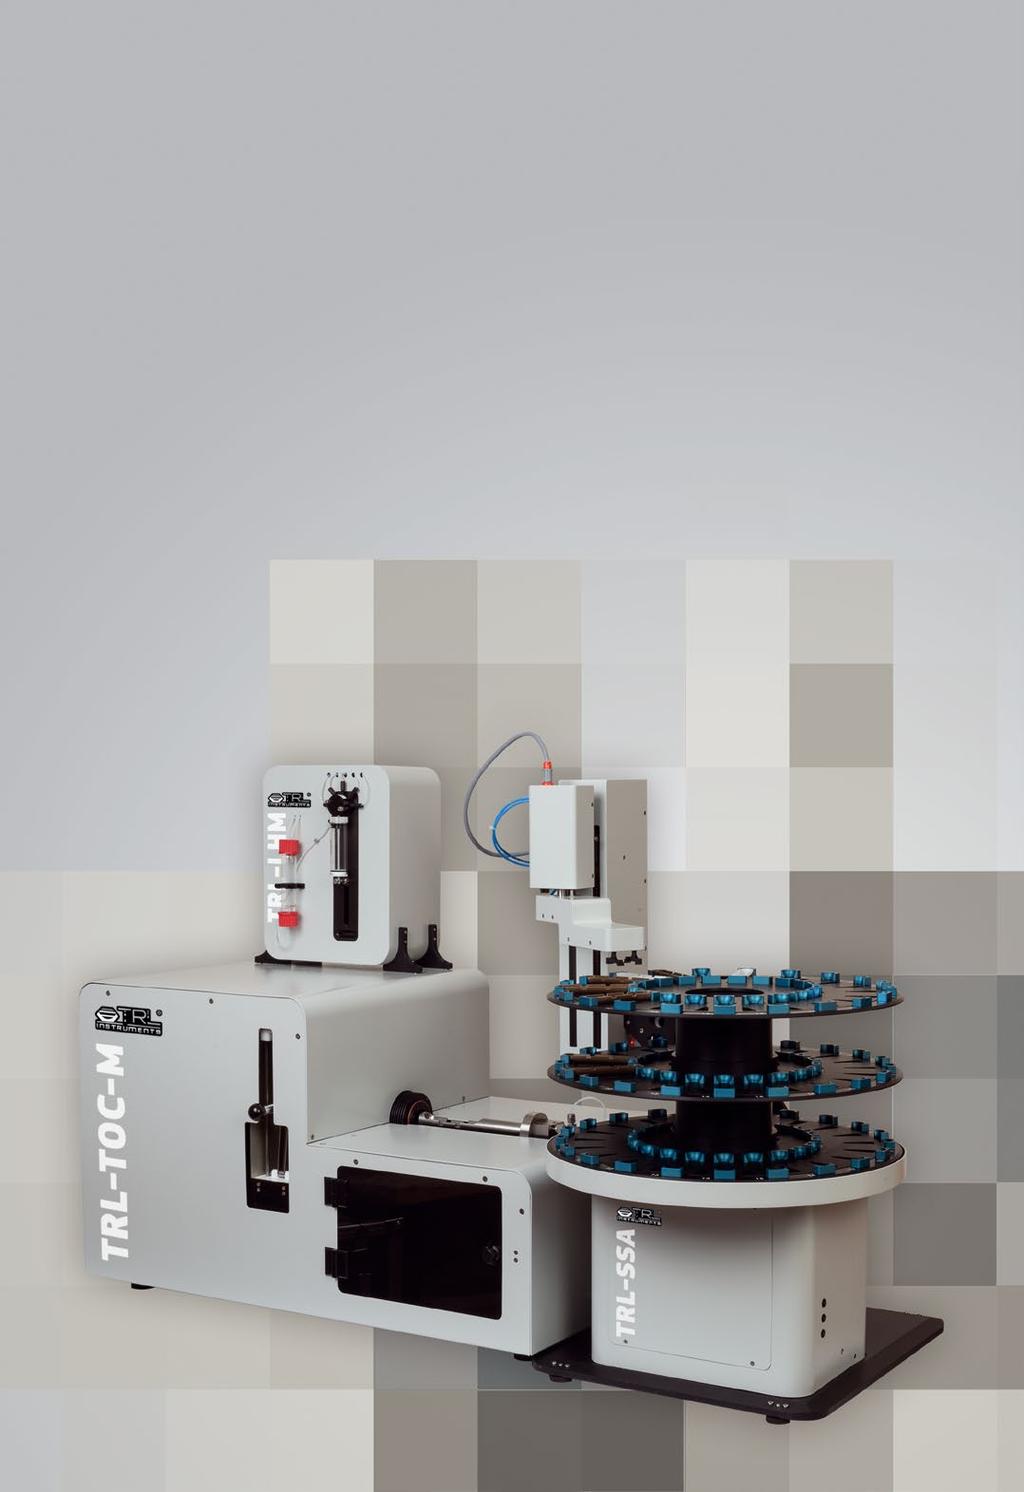 TRL-TOC-M MODEL MODULAR TC/IC/TOC/TN ANALYZER FOR LIQUID AND SOLID SAMPLES TRL-TOC-M Model TC/IC/TOC/TN Analyzers are designed to